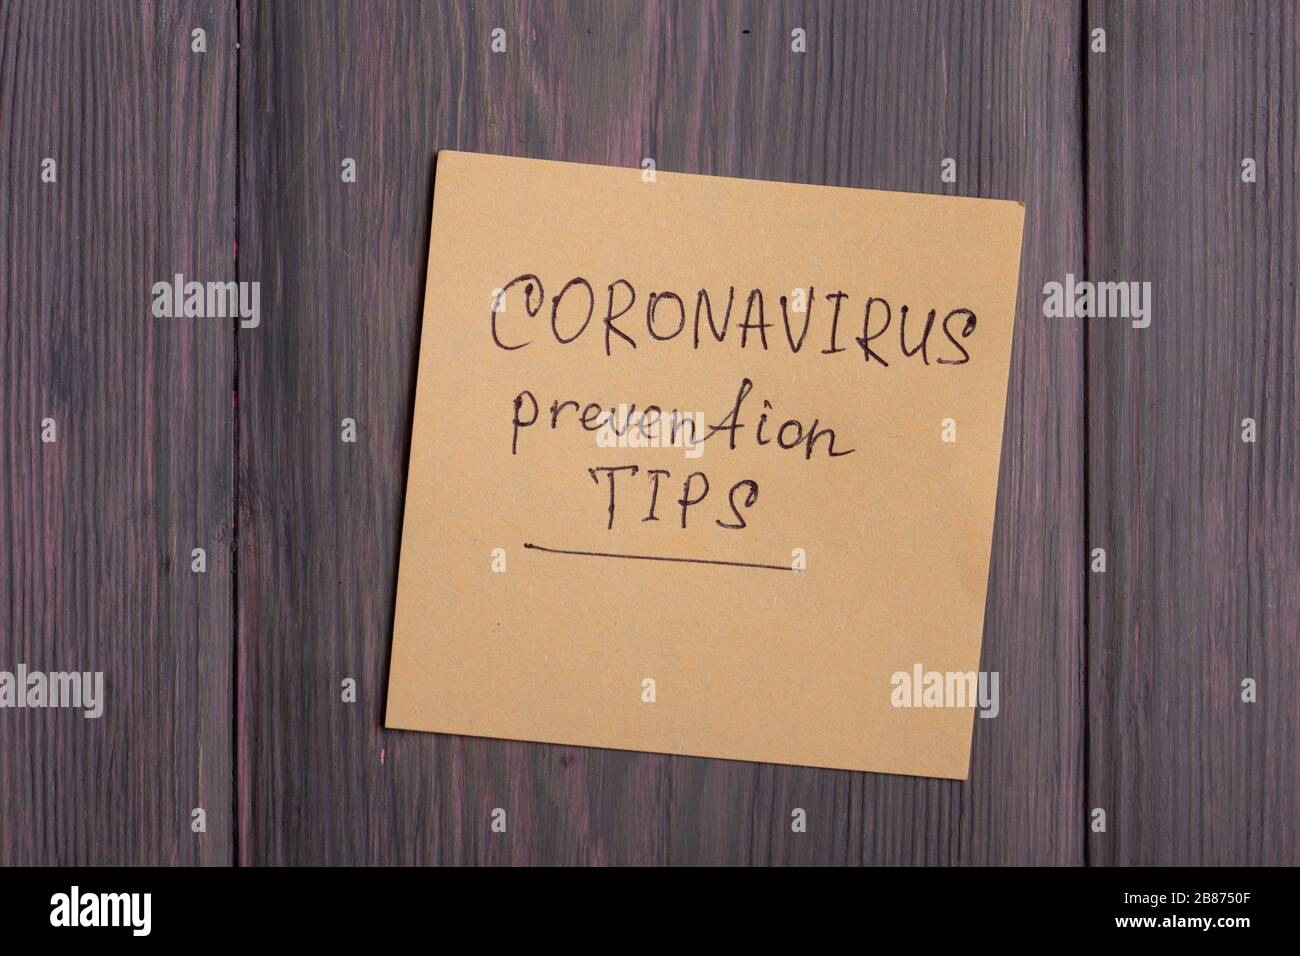 Text Coronavirus prevention tips on sticky note on wooden background - healthcare and medical concept Stock Photo